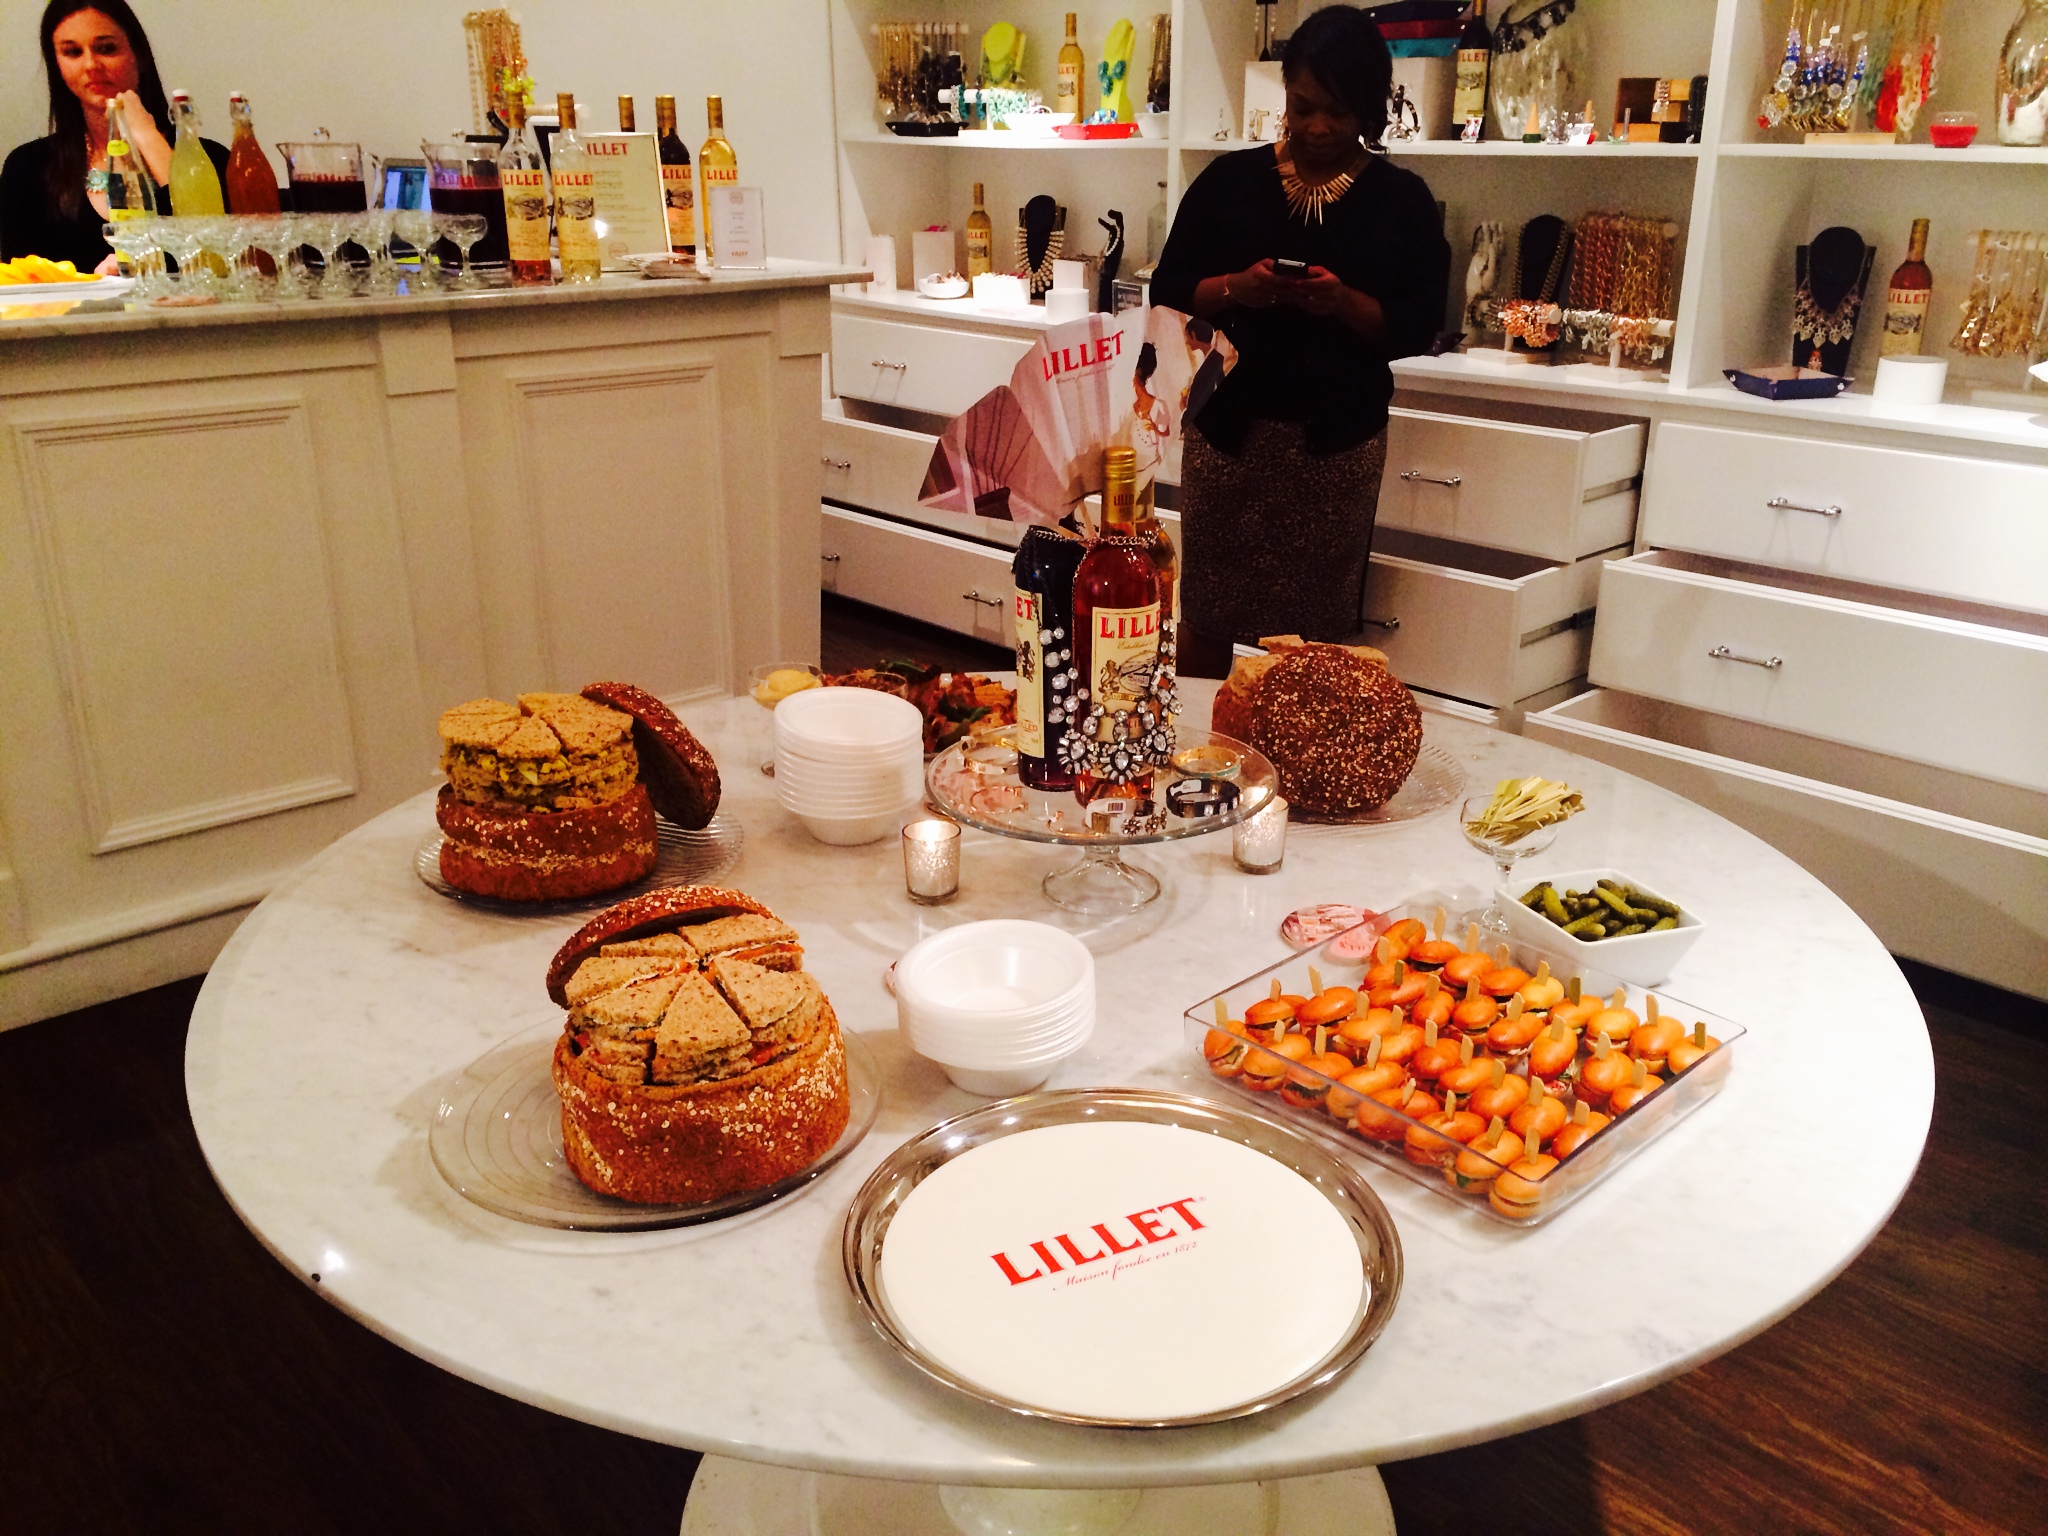 Lillet National Aperitif Day